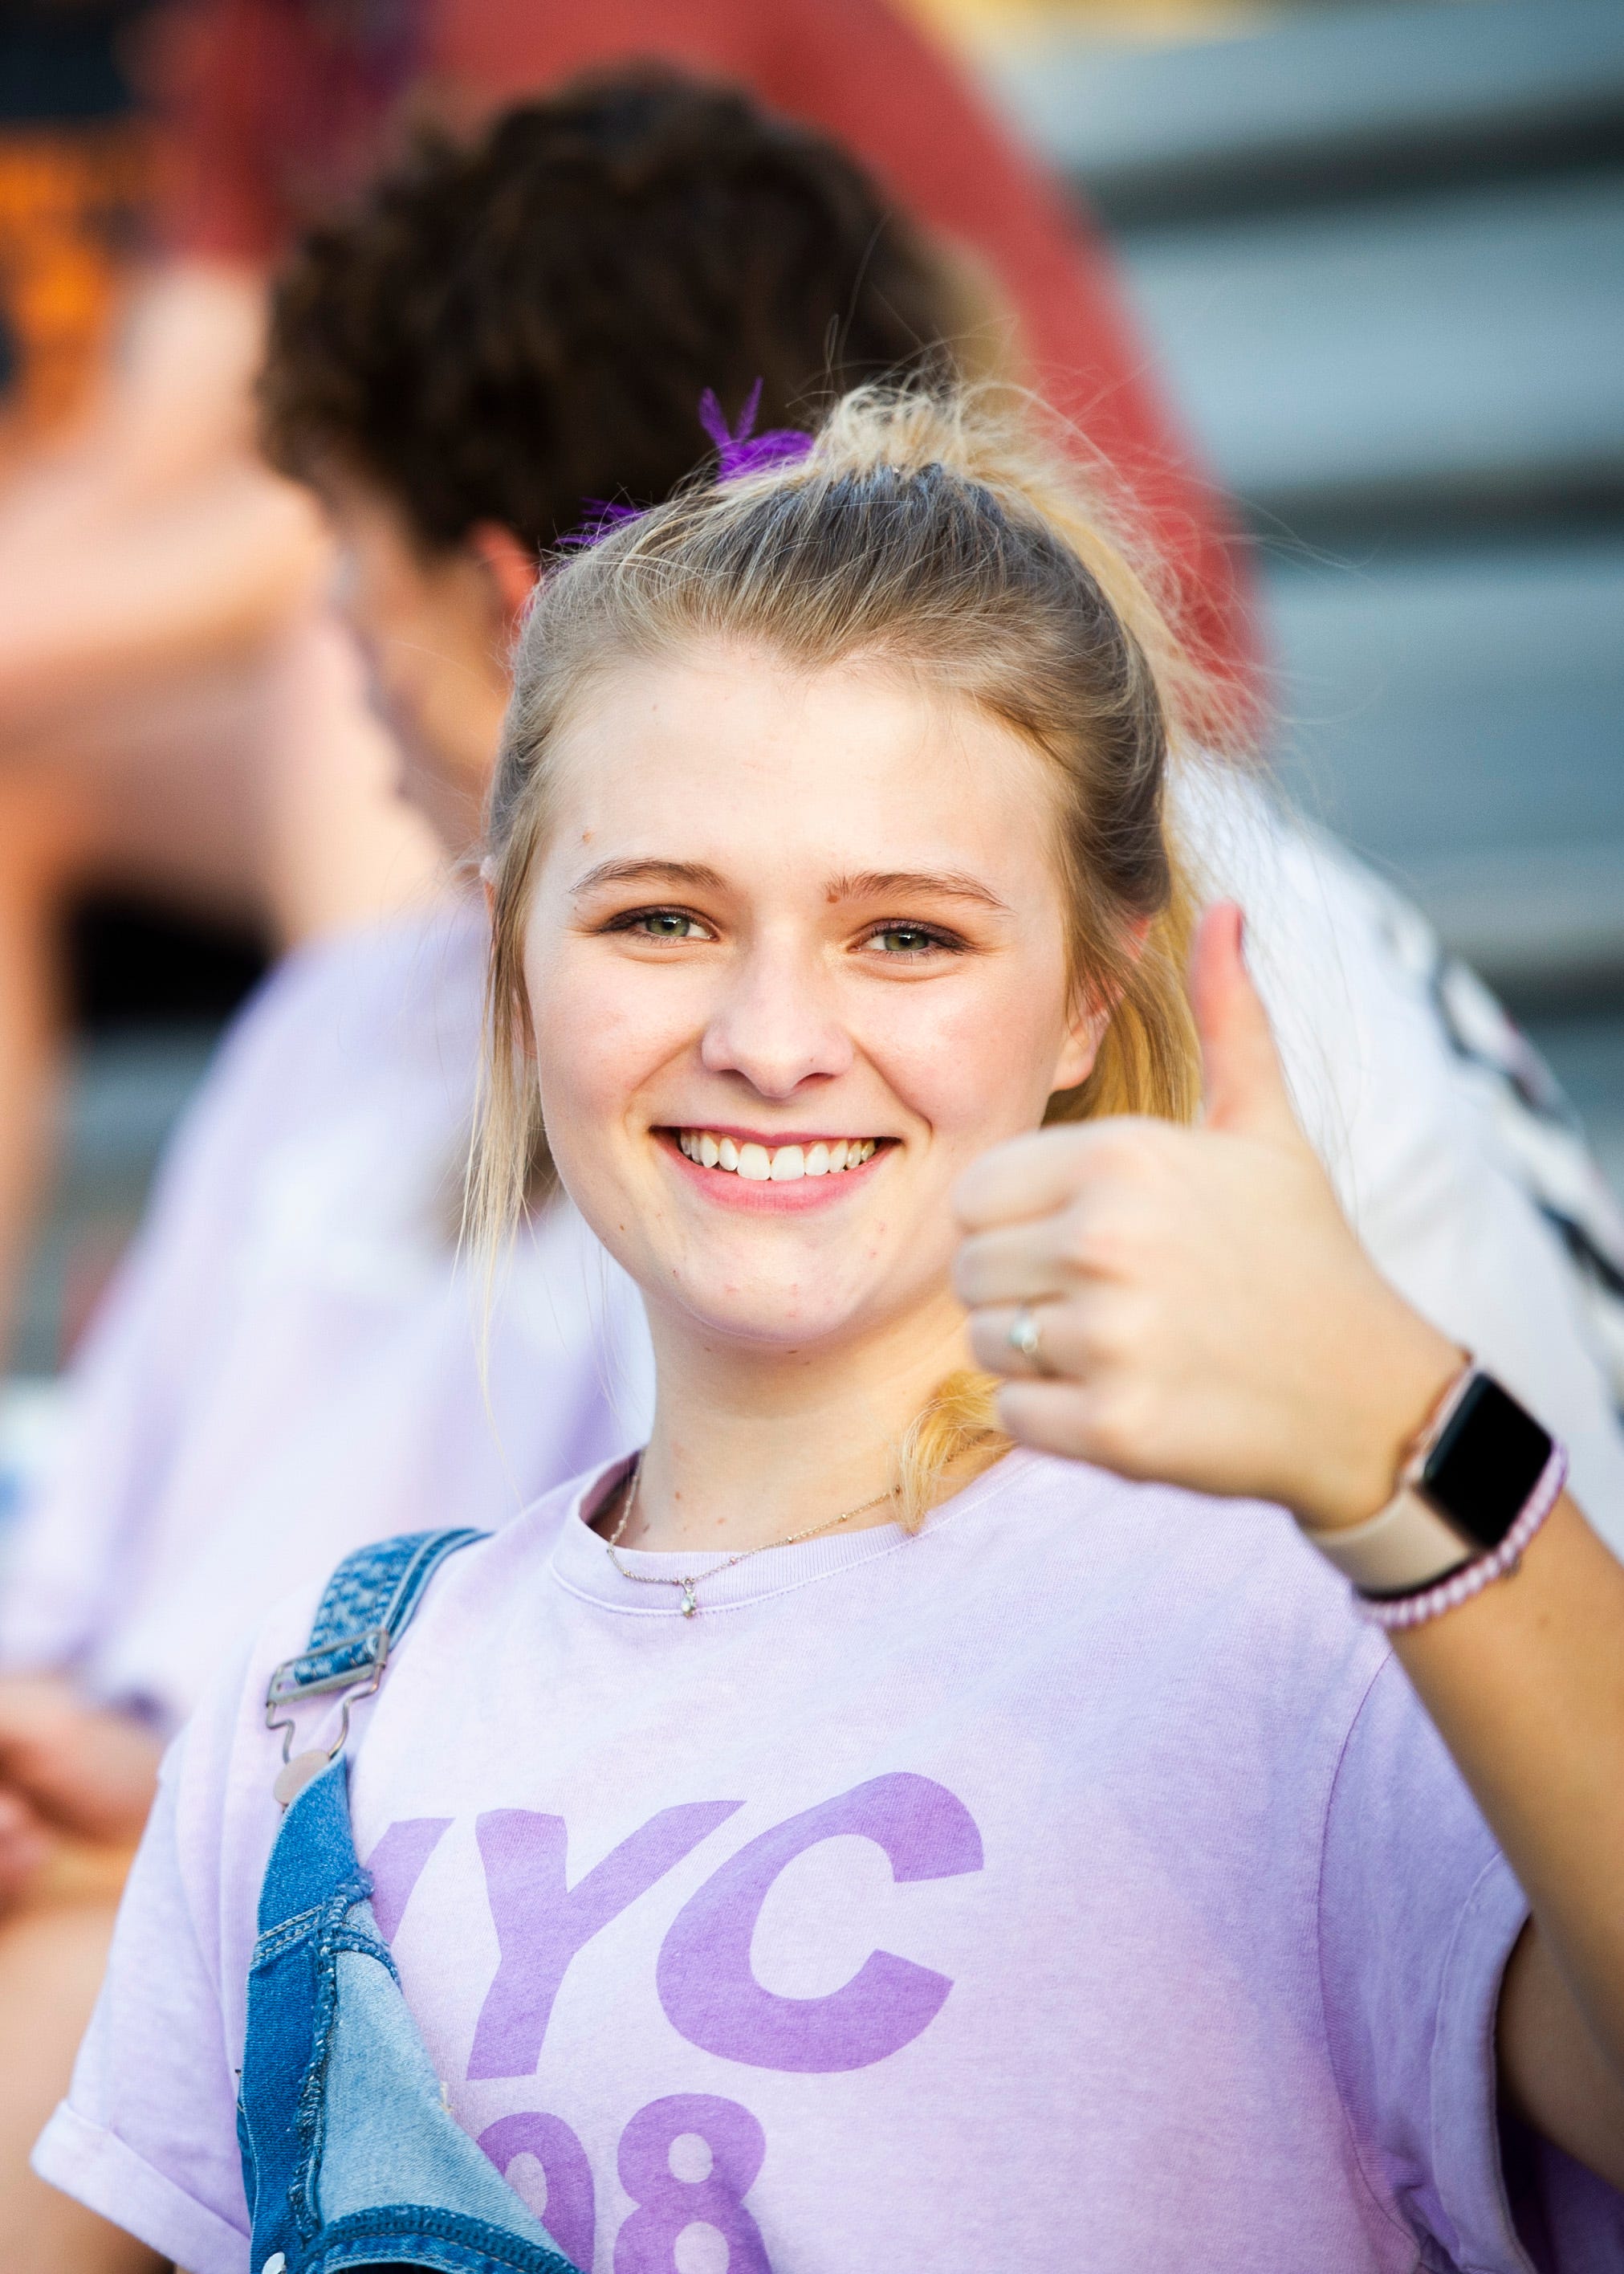 Halls senior, Brooke Allen, gives a thumbs up before the Halls and Central high school football game on Friday, October 4, 2019 at Halls High School.